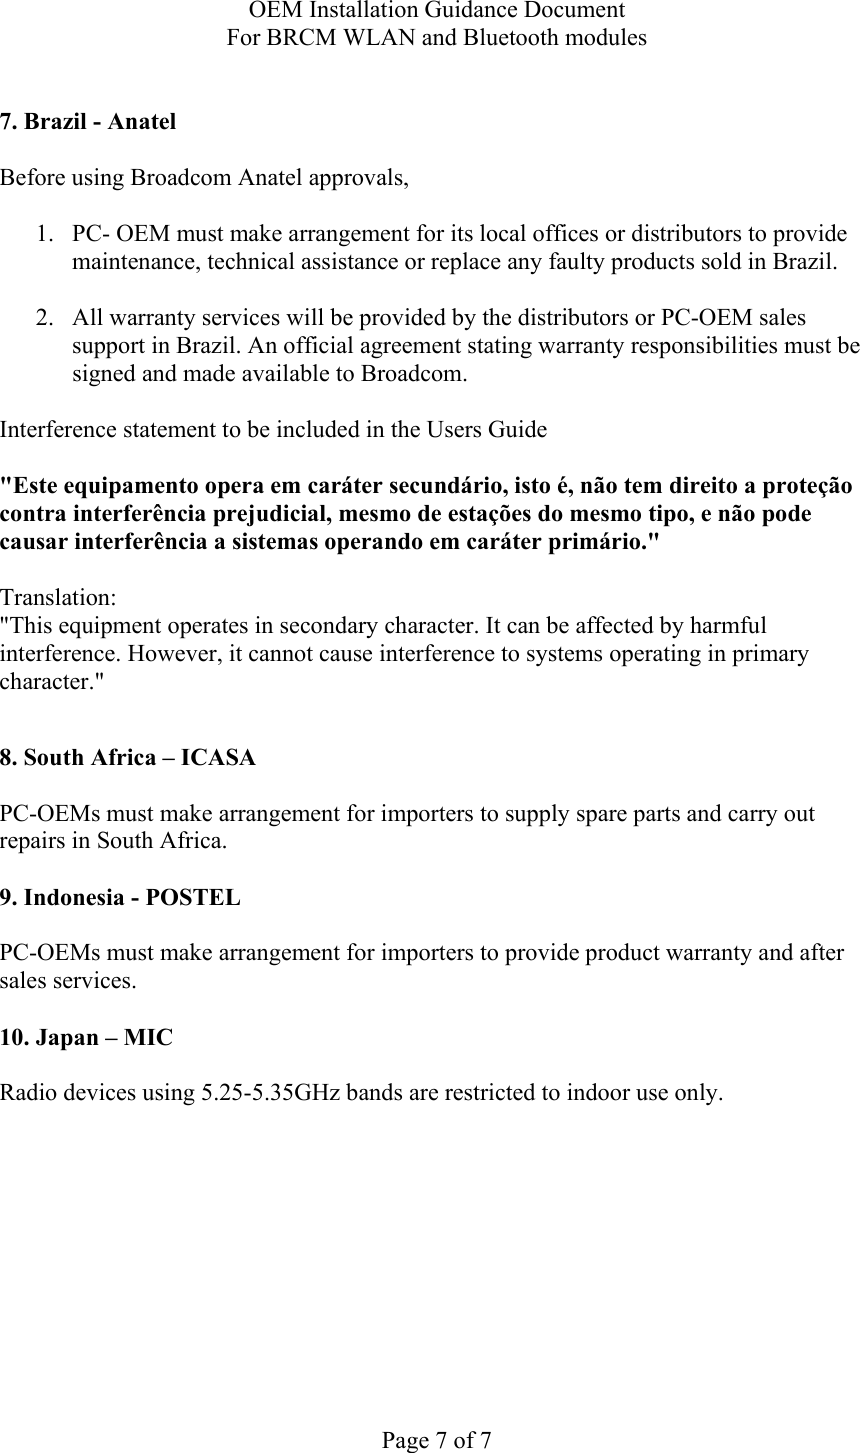 OEM Installation Guidance Document For BRCM WLAN and Bluetooth modules  Page 7 of 7  7. Brazil - Anatel   Before using Broadcom Anatel approvals,   1. PC- OEM must make arrangement for its local offices or distributors to provide maintenance, technical assistance or replace any faulty products sold in Brazil.   2. All warranty services will be provided by the distributors or PC-OEM sales support in Brazil. An official agreement stating warranty responsibilities must be signed and made available to Broadcom.   Interference statement to be included in the Users Guide &quot;Este equipamento opera em caráter secundário, isto é, não tem direito a proteção contra interferência prejudicial, mesmo de estações do mesmo tipo, e não pode causar interferência a sistemas operando em caráter primário.&quot; Translation:  &quot;This equipment operates in secondary character. It can be affected by harmful interference. However, it cannot cause interference to systems operating in primary character.&quot;    8. South Africa – ICASA  PC-OEMs must make arrangement for importers to supply spare parts and carry out repairs in South Africa.  9. Indonesia - POSTEL  PC-OEMs must make arrangement for importers to provide product warranty and after sales services.   10. Japan – MIC  Radio devices using 5.25-5.35GHz bands are restricted to indoor use only.  